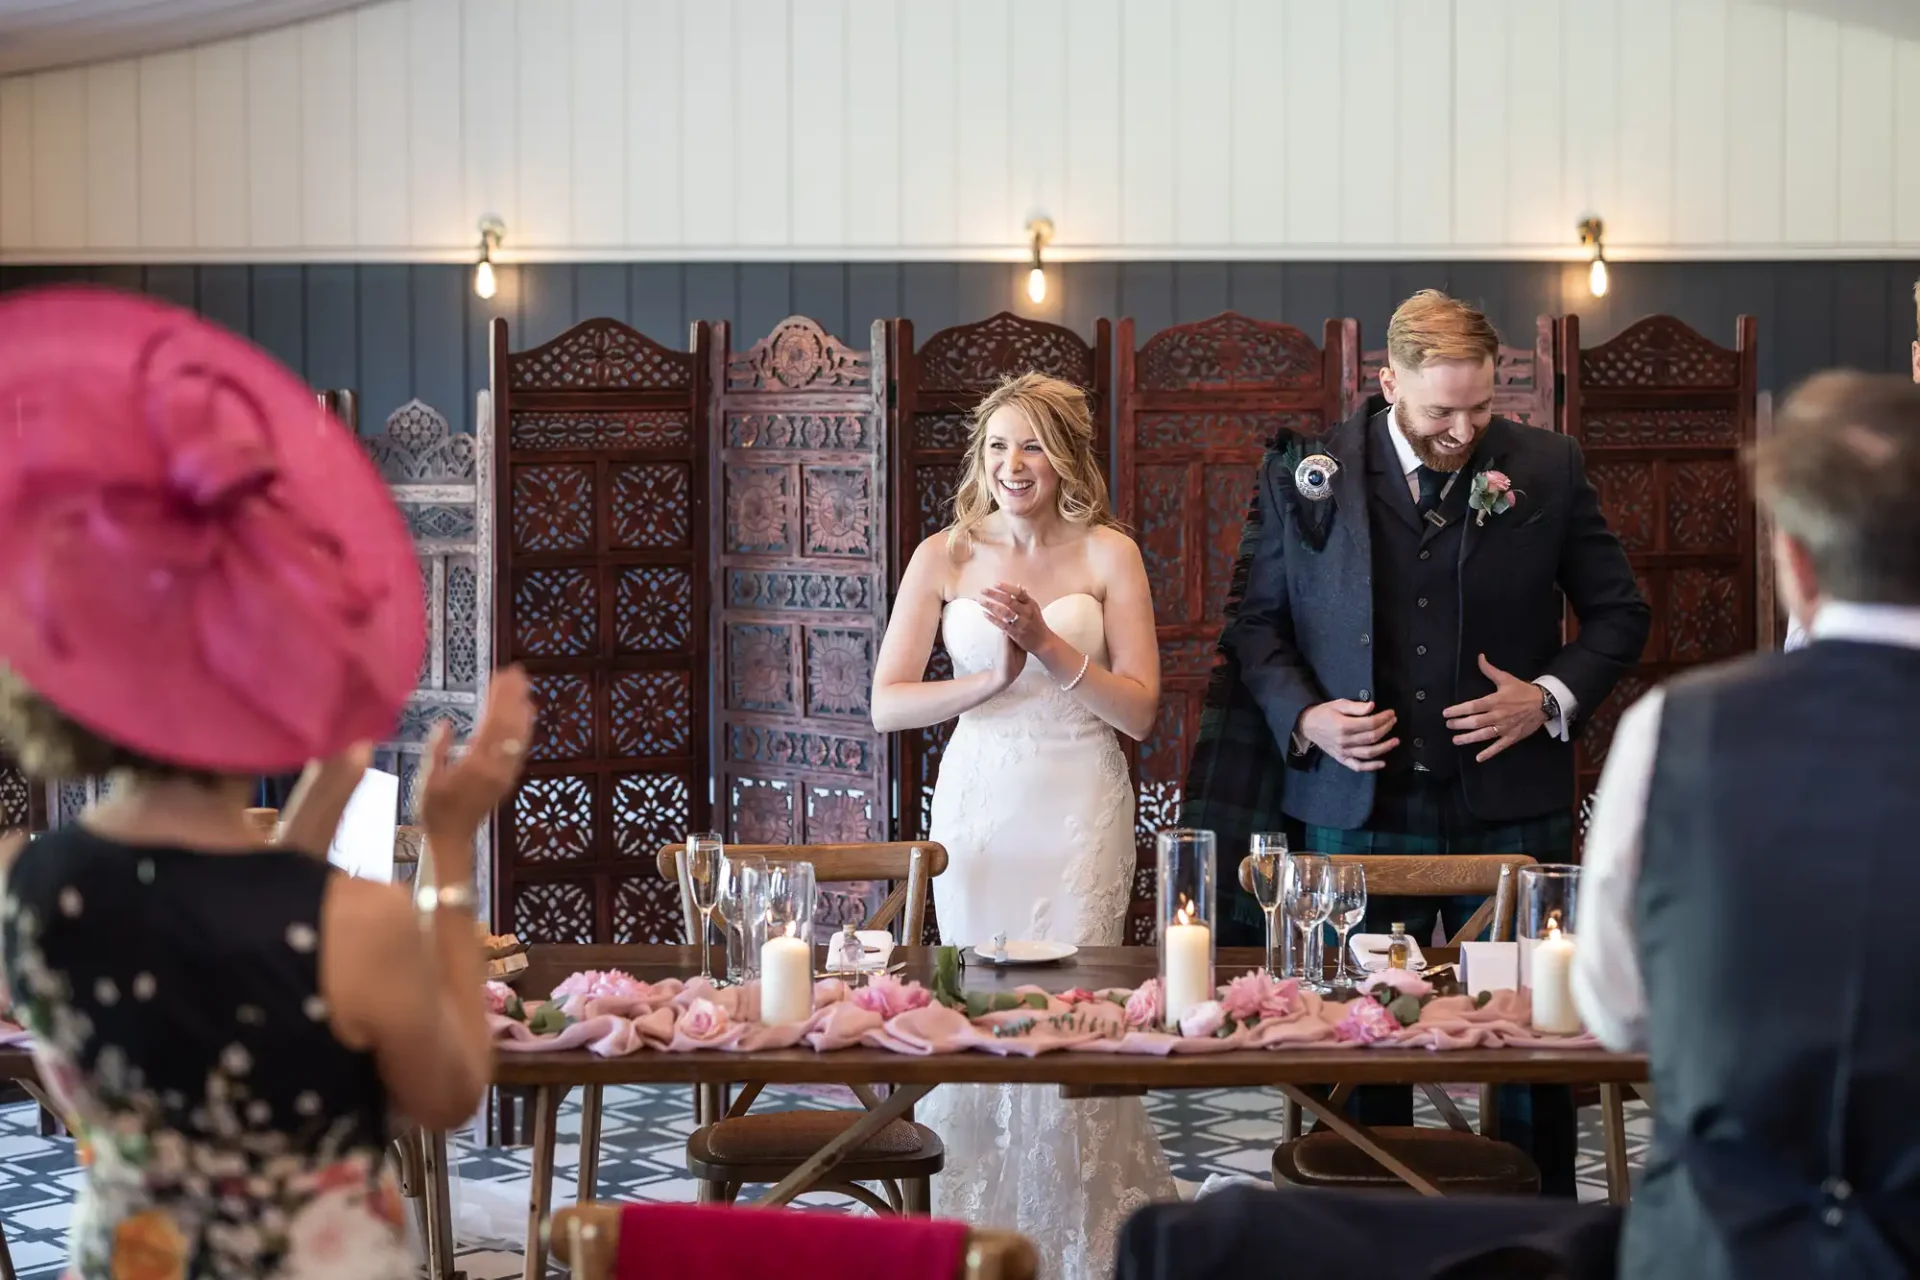 Bride and groom smiling at a wedding reception while guests look on, groom wearing a kilt, beautifully decorated table with pink flowers.